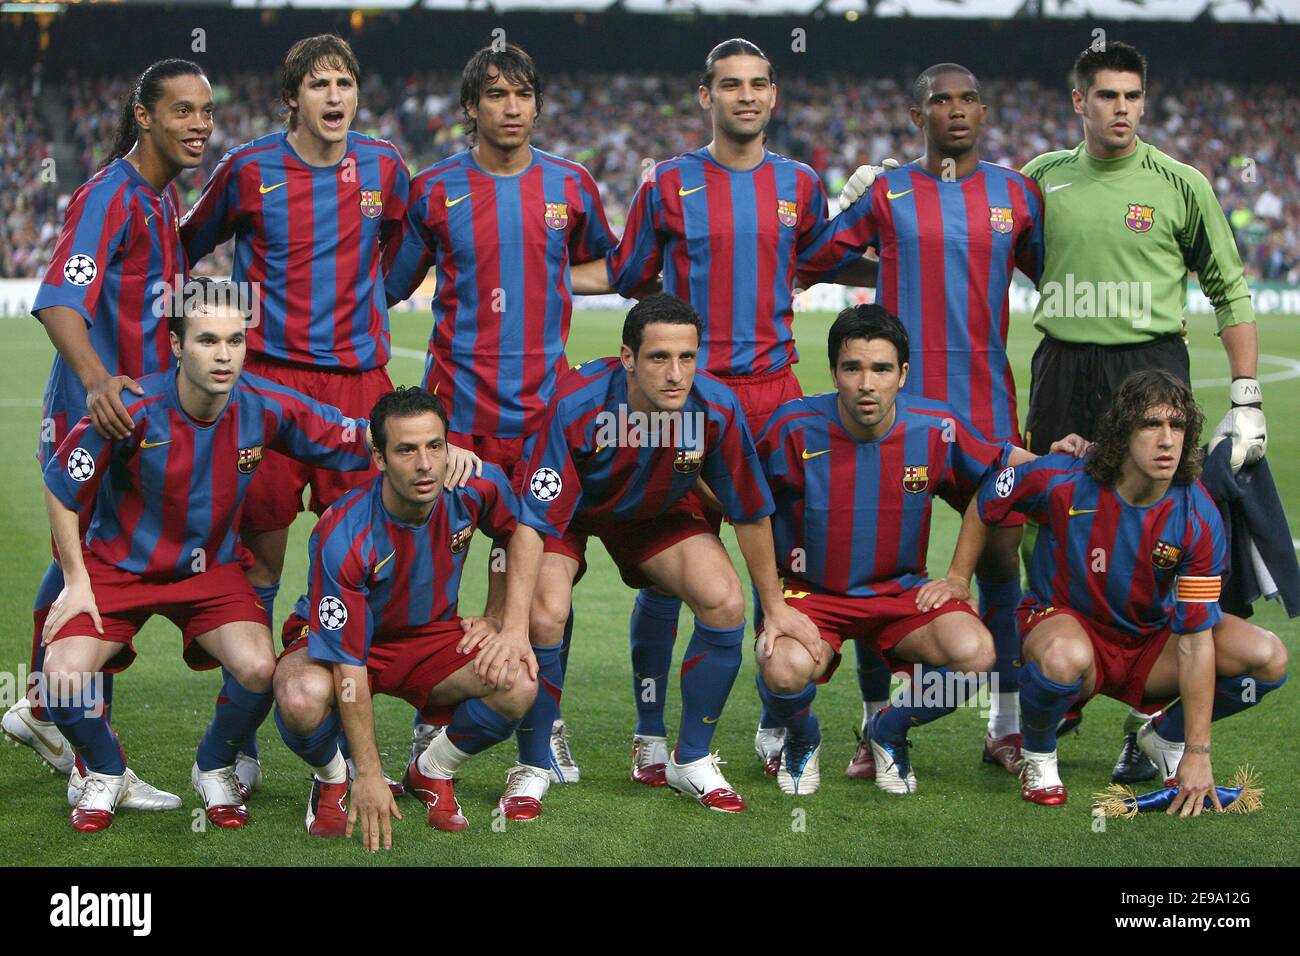 FC Barcelona's team during the UEFA Champions League Semi-Final Second Leg,  Barcelona vs AC Milan in Barcelona, Spain, on April 26, 2006. The game  ended in a draw 0-0 and Barcelona is